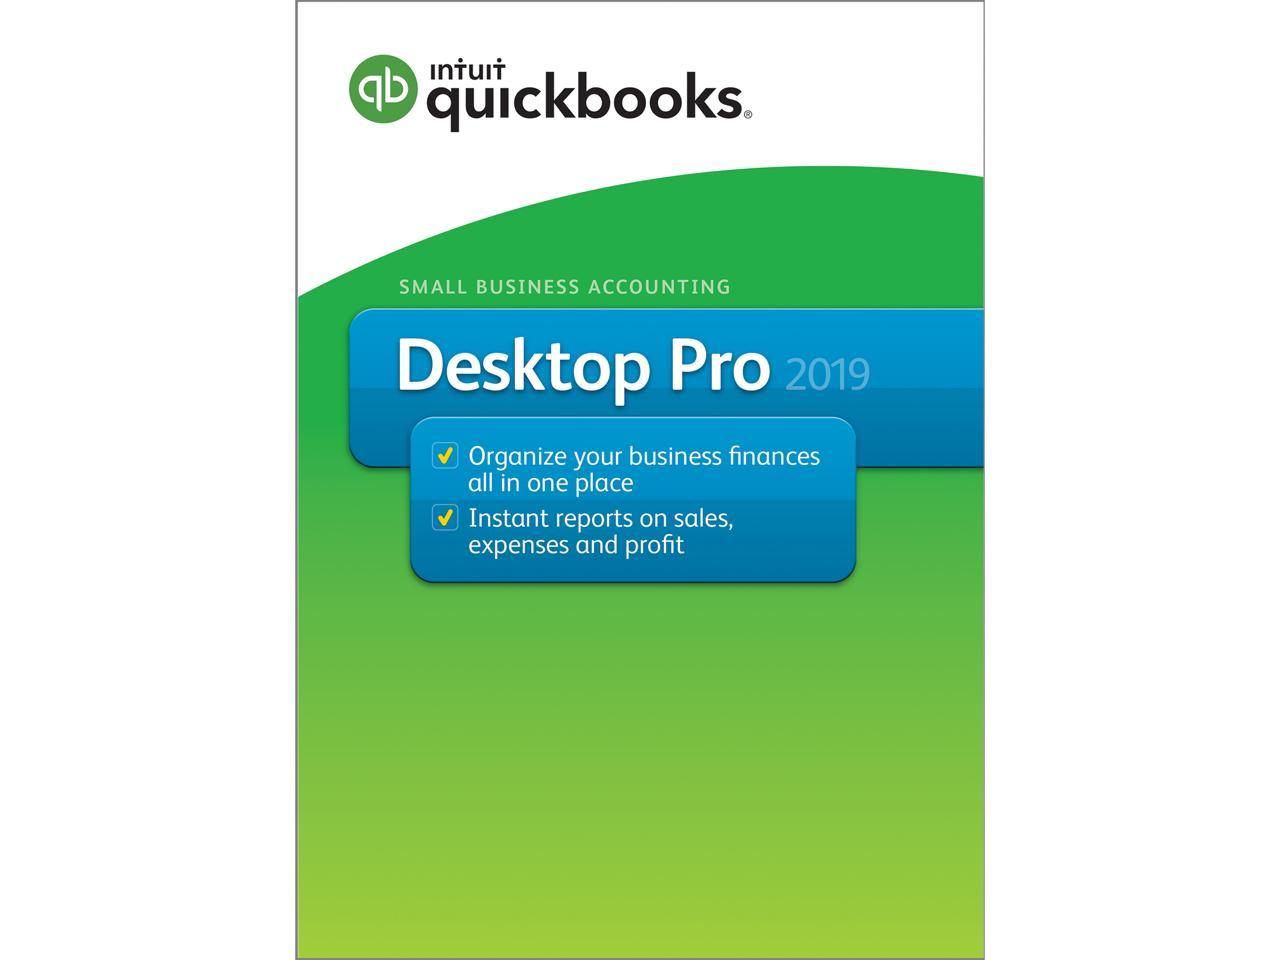 moving quickbooks from windows to mac